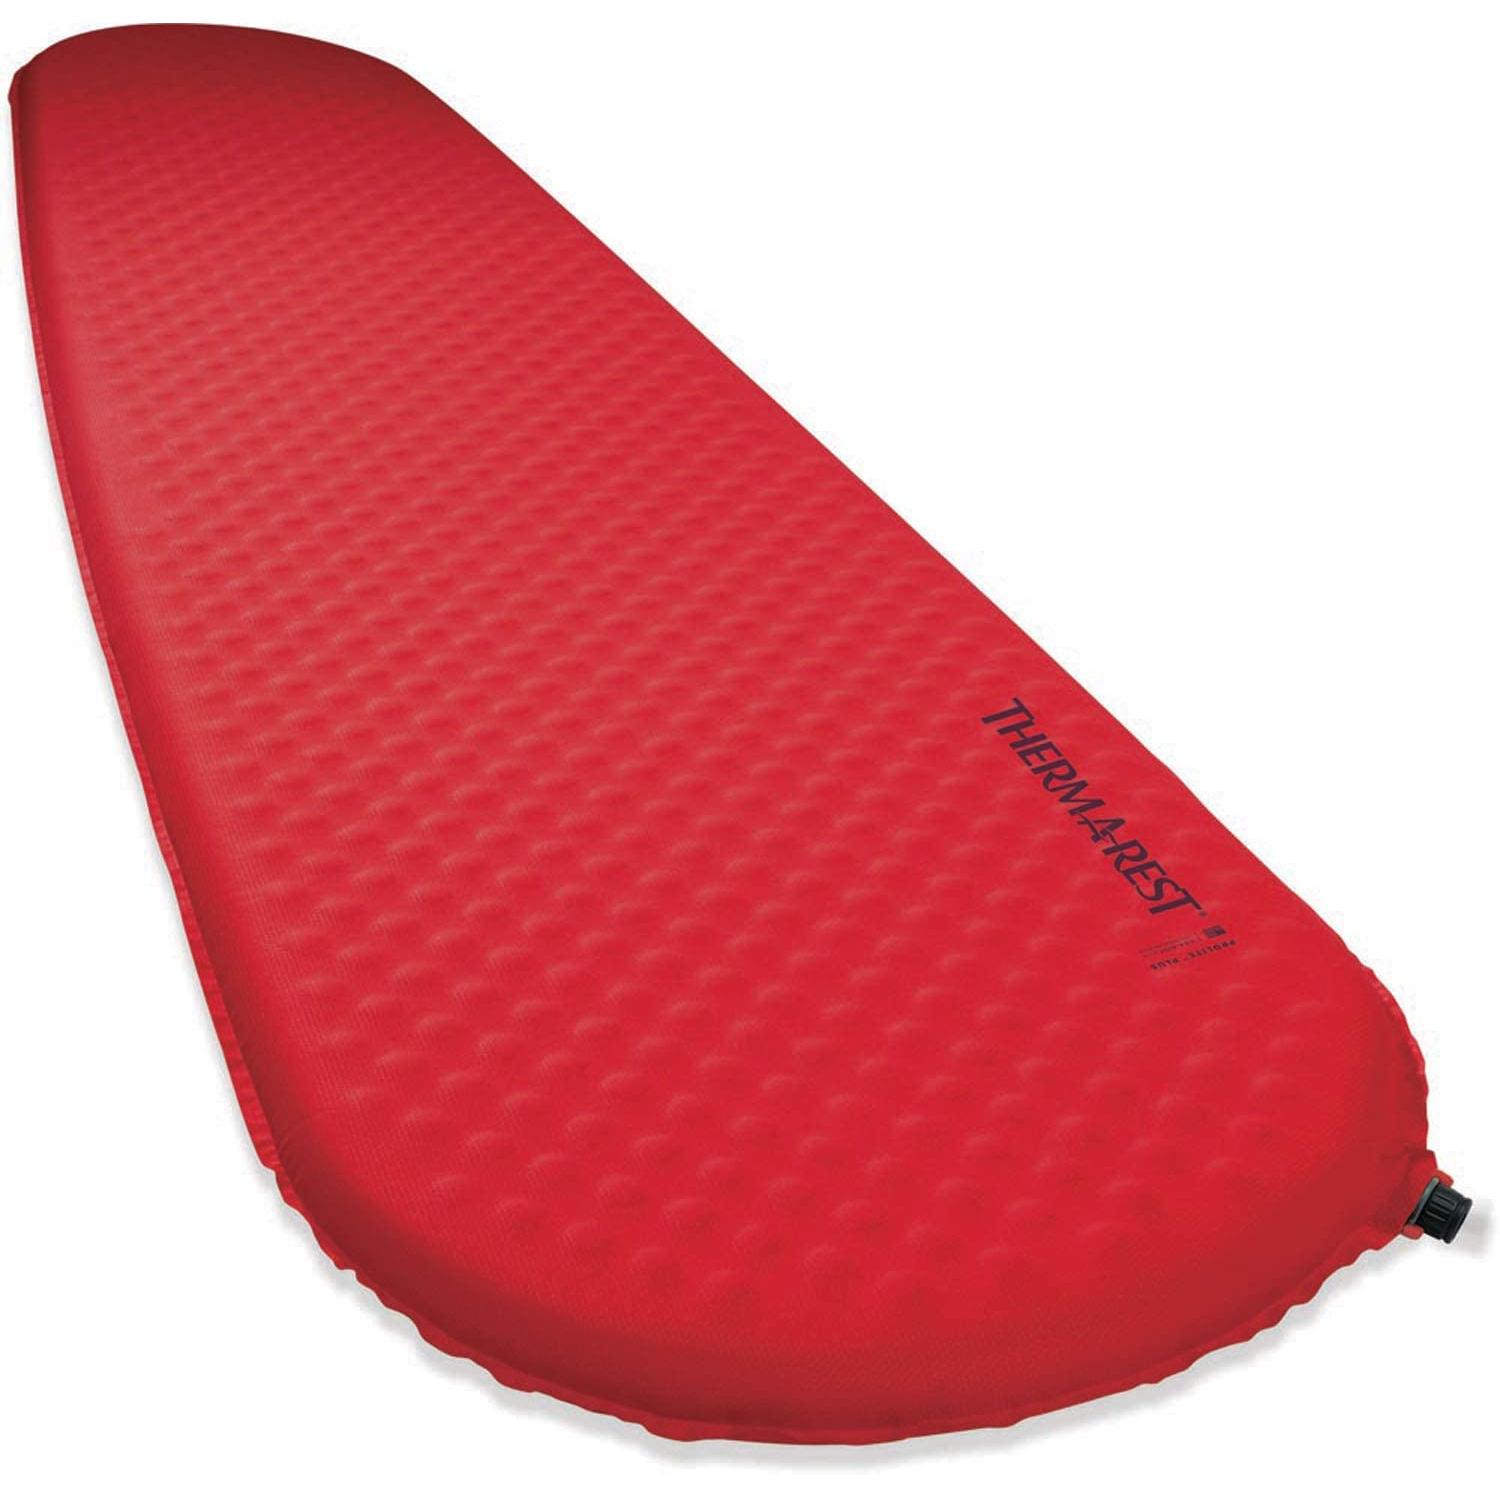 Therm-a-Rest Prolite Ultralight Self-Inflating Backpacking Pad with WingLock Valve 